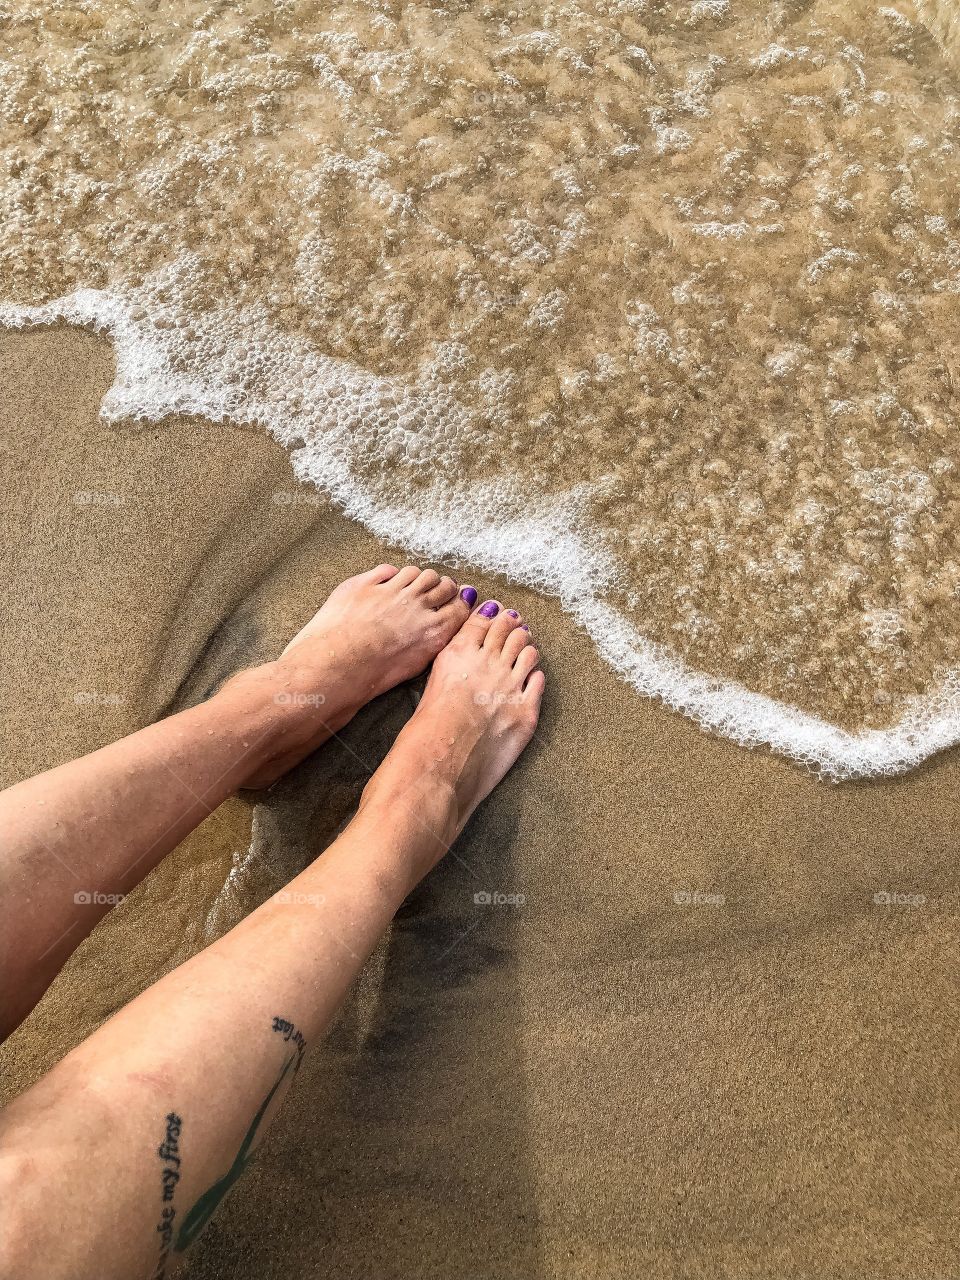  Feet in the sand